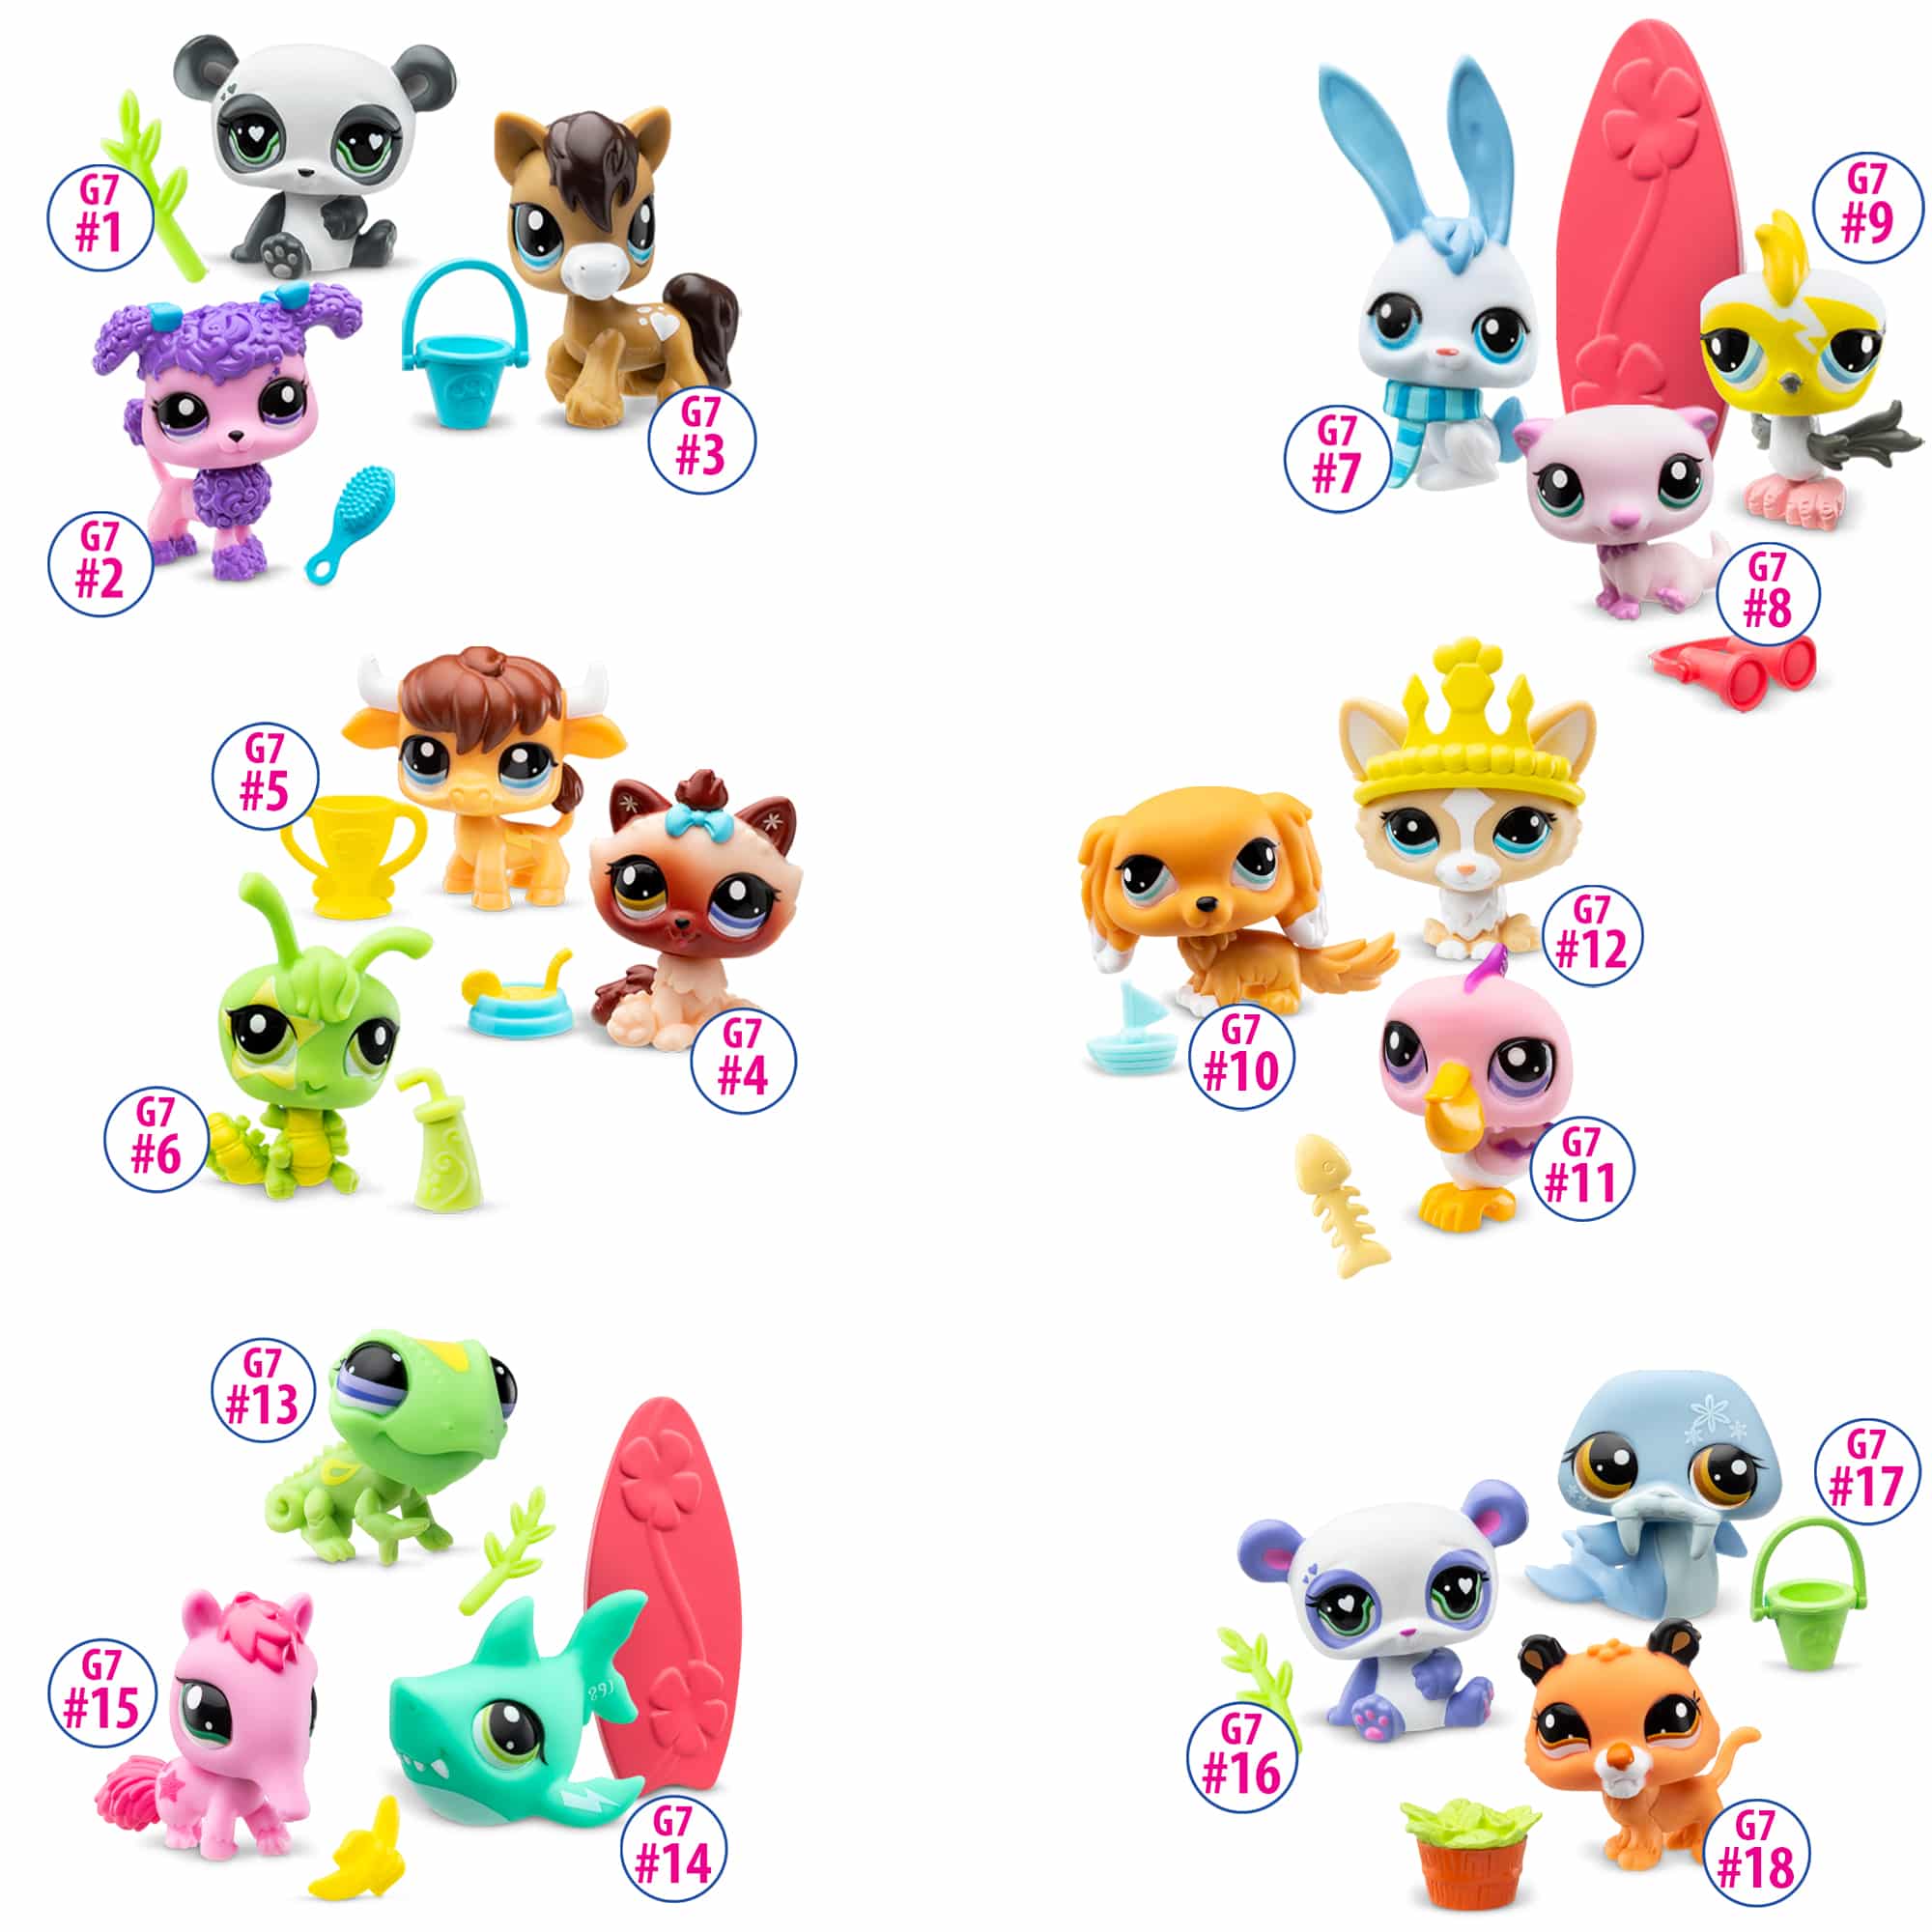 LPS: My 10 Favorite Things About Christmas 